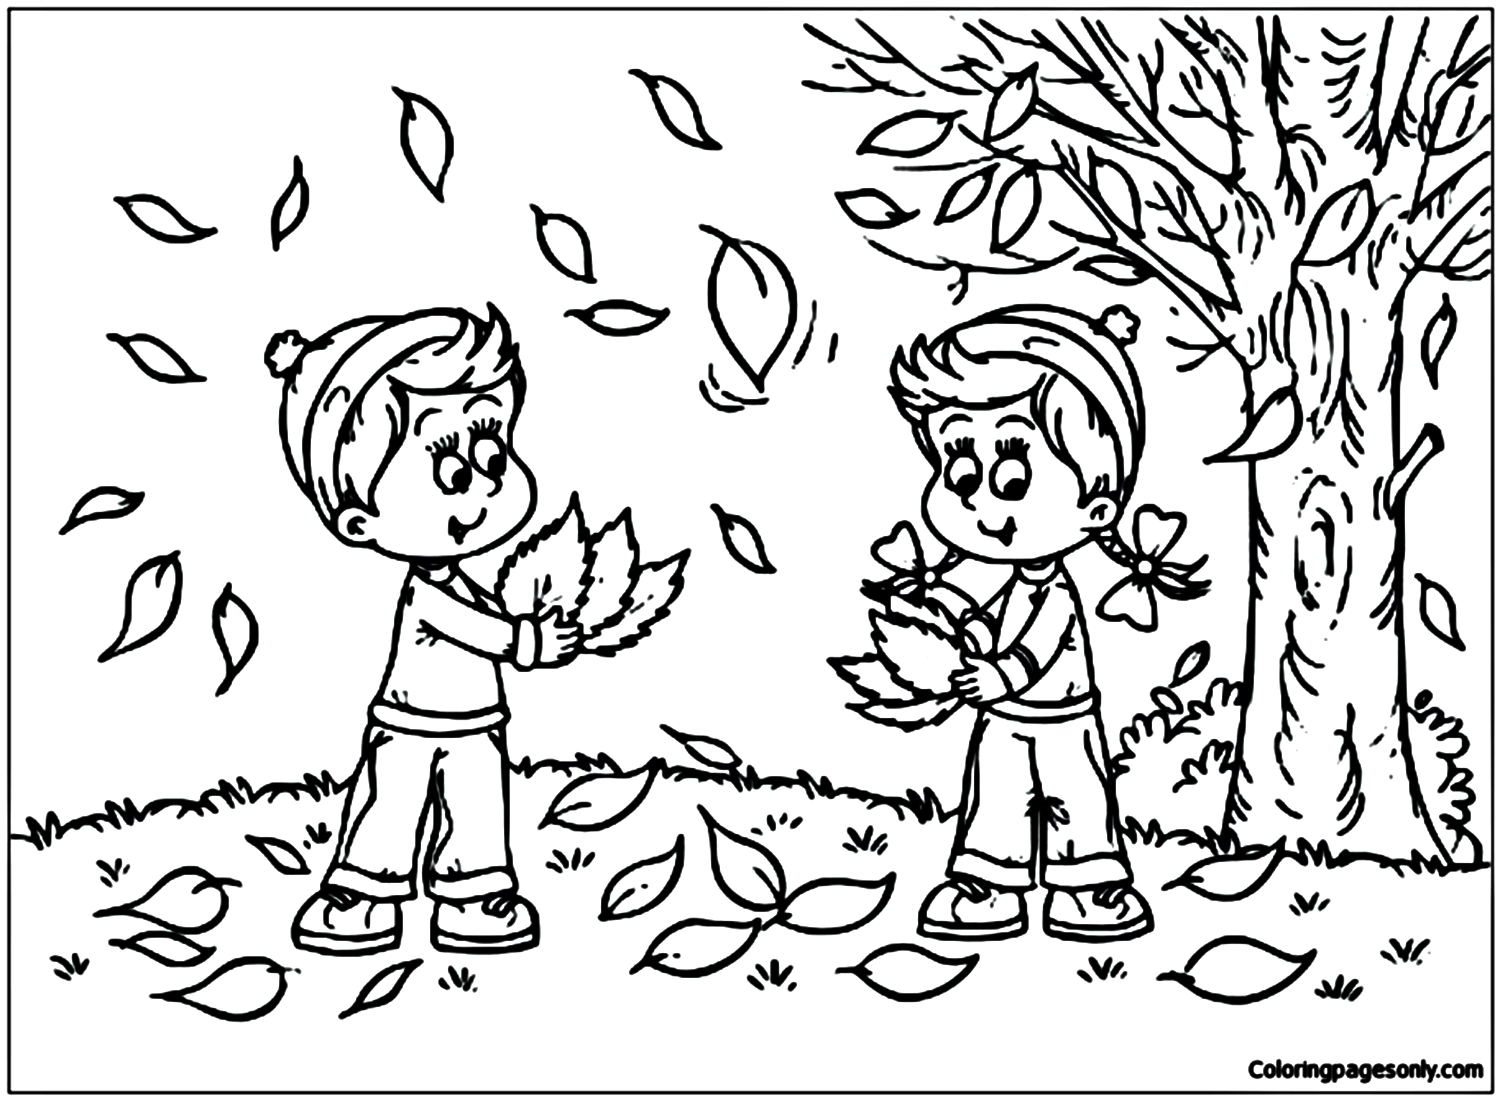 Kids Playing With Fall Leaves Coloring Page - Free Printable Coloring Pages